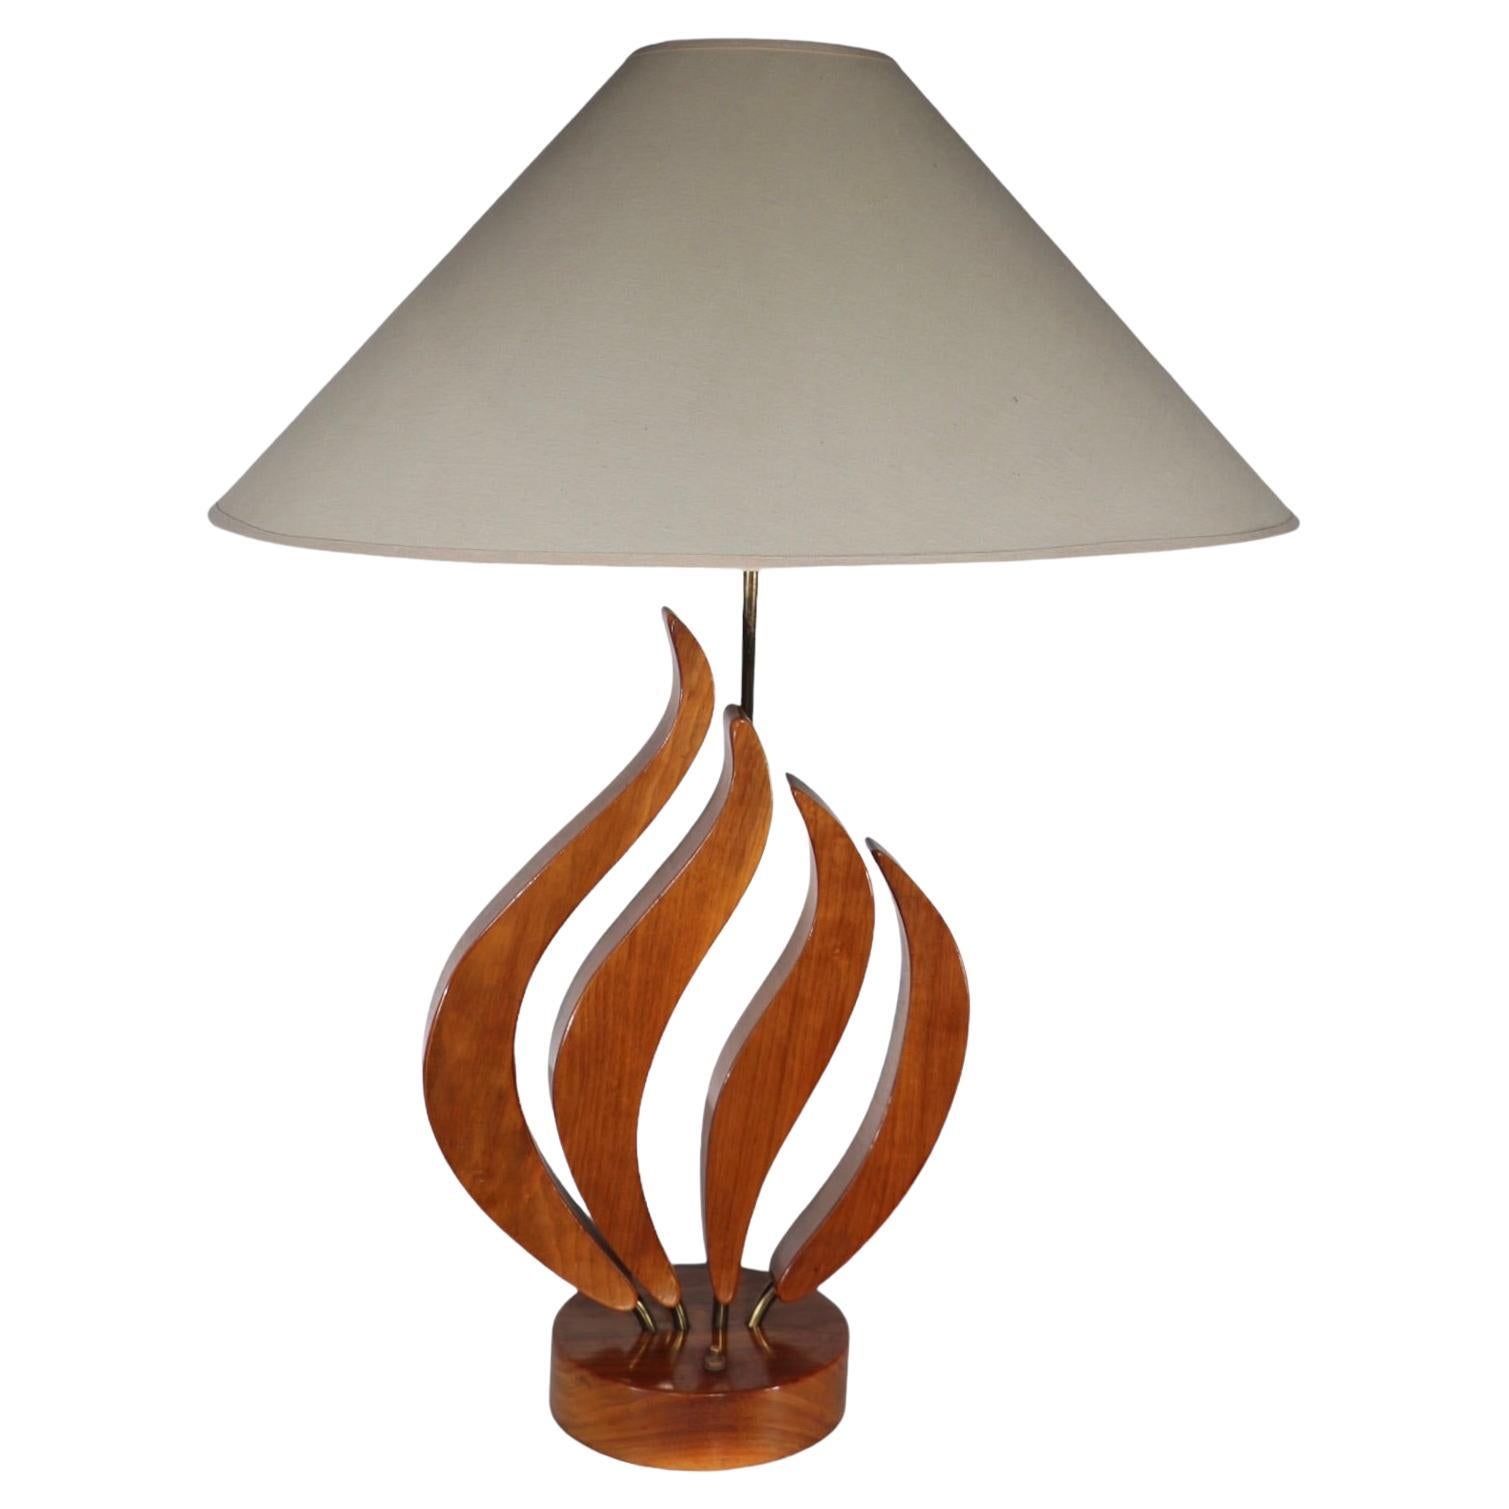 Unusual organic form Mid Century table lamp, having four pedal like wood elements sprouting from a circular plinth base, all constructed of solid wood. Design reminiscent of the lamp designs of Adrian Pearsall, and John Keal, however we cannot